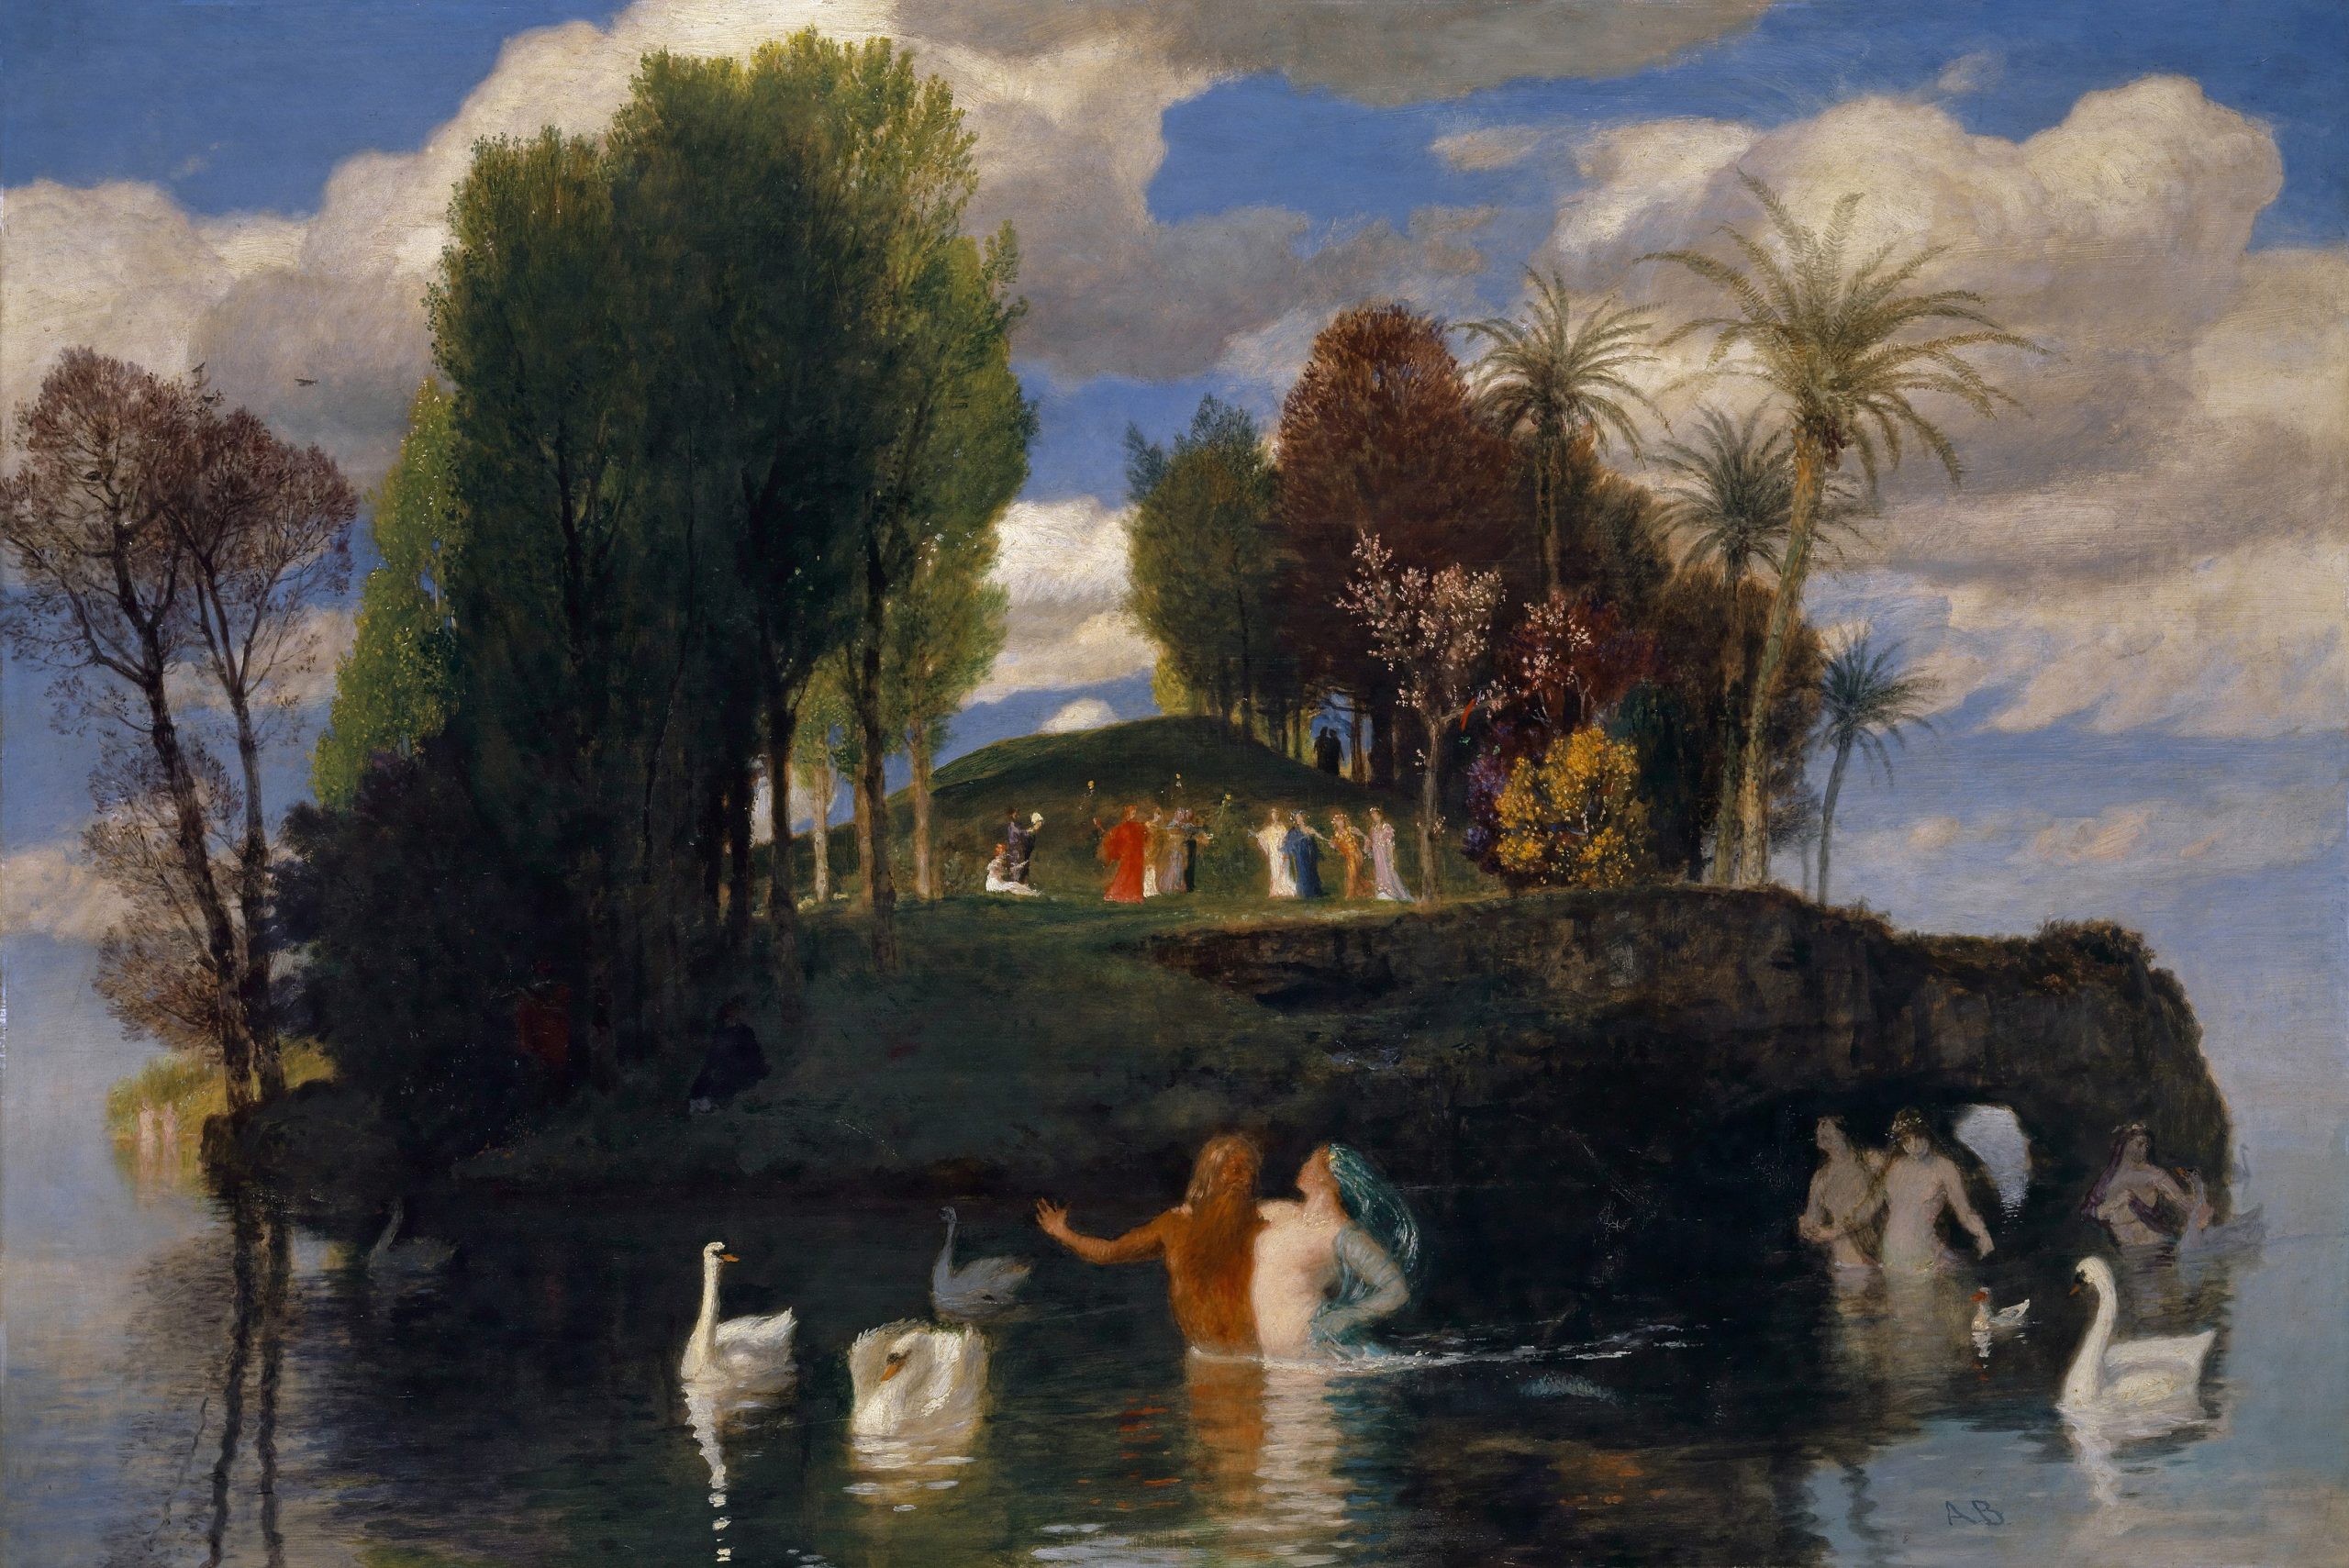 Men and women rejoicing in an island with several swan swimming in still waters below